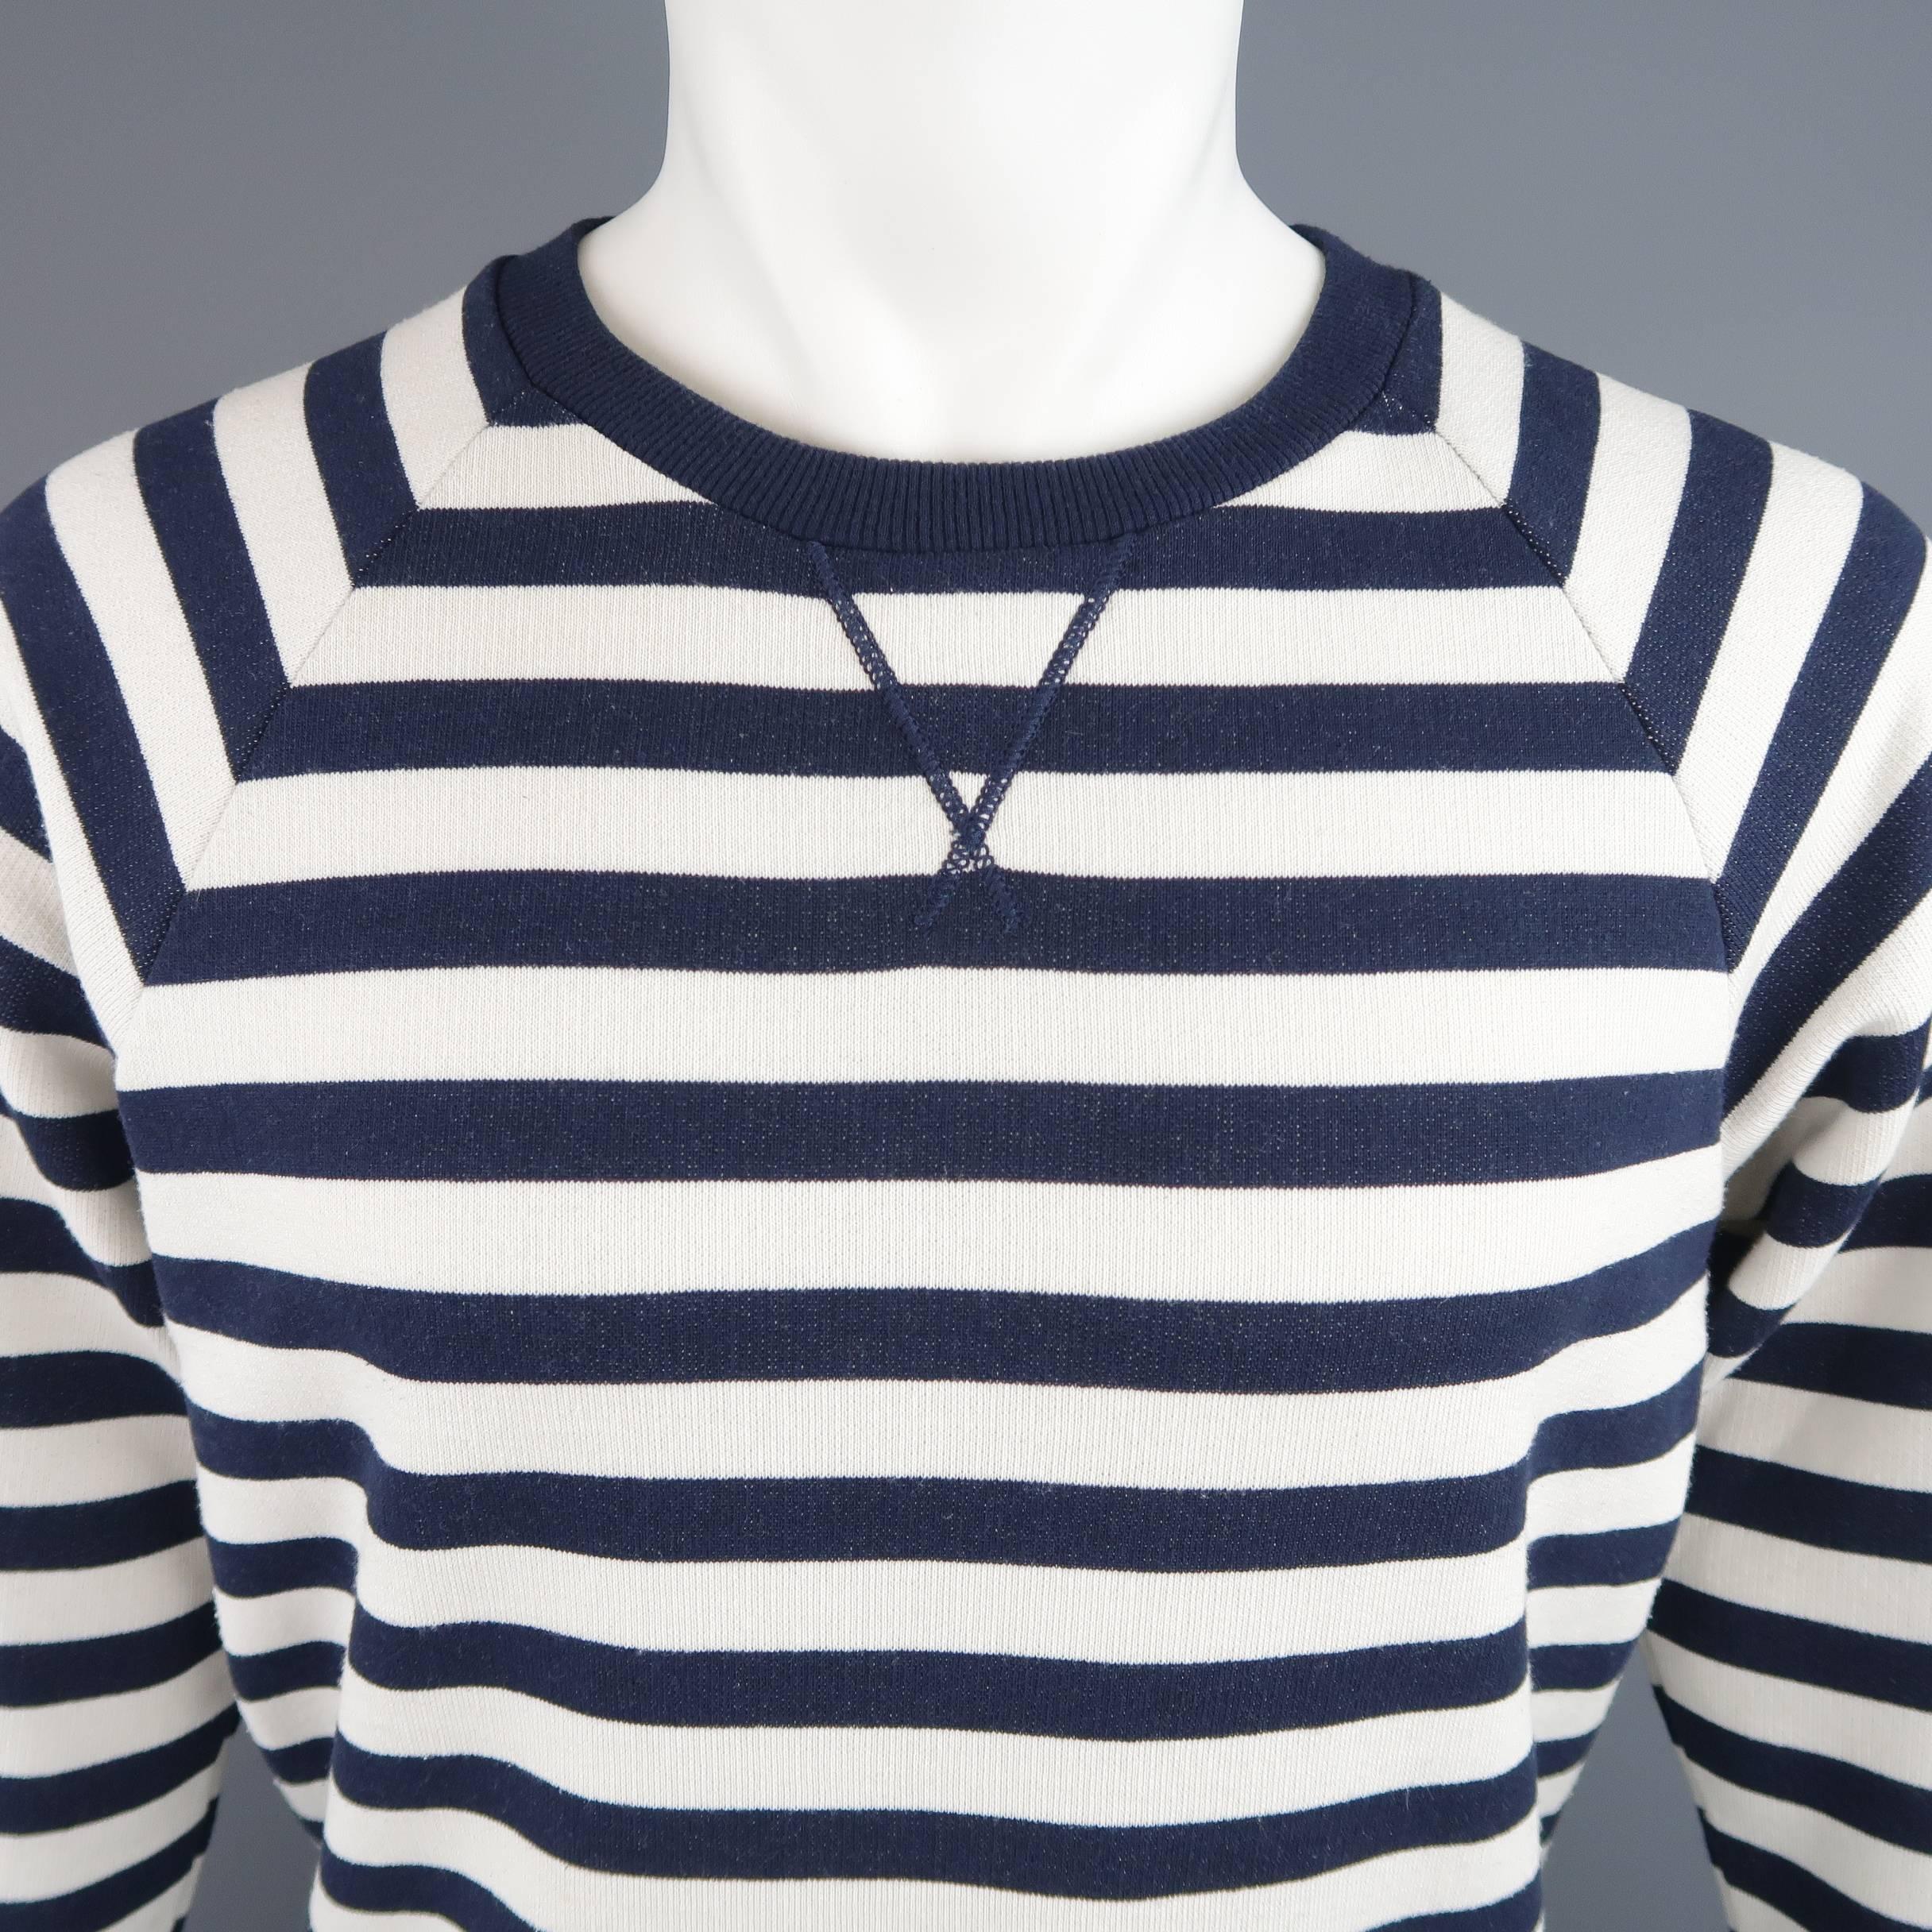 SAINT LAURENT pullover comes in cream and navy striped French terrycloth and features a round neck with dorito stitch, raglan sleeves, and ribbed cuffs.  Made in Italy.
 
Good Pre-Owned Condition.
Marked:  L
 
Measurements:
 
Shoulder: 16 in.
Chest: